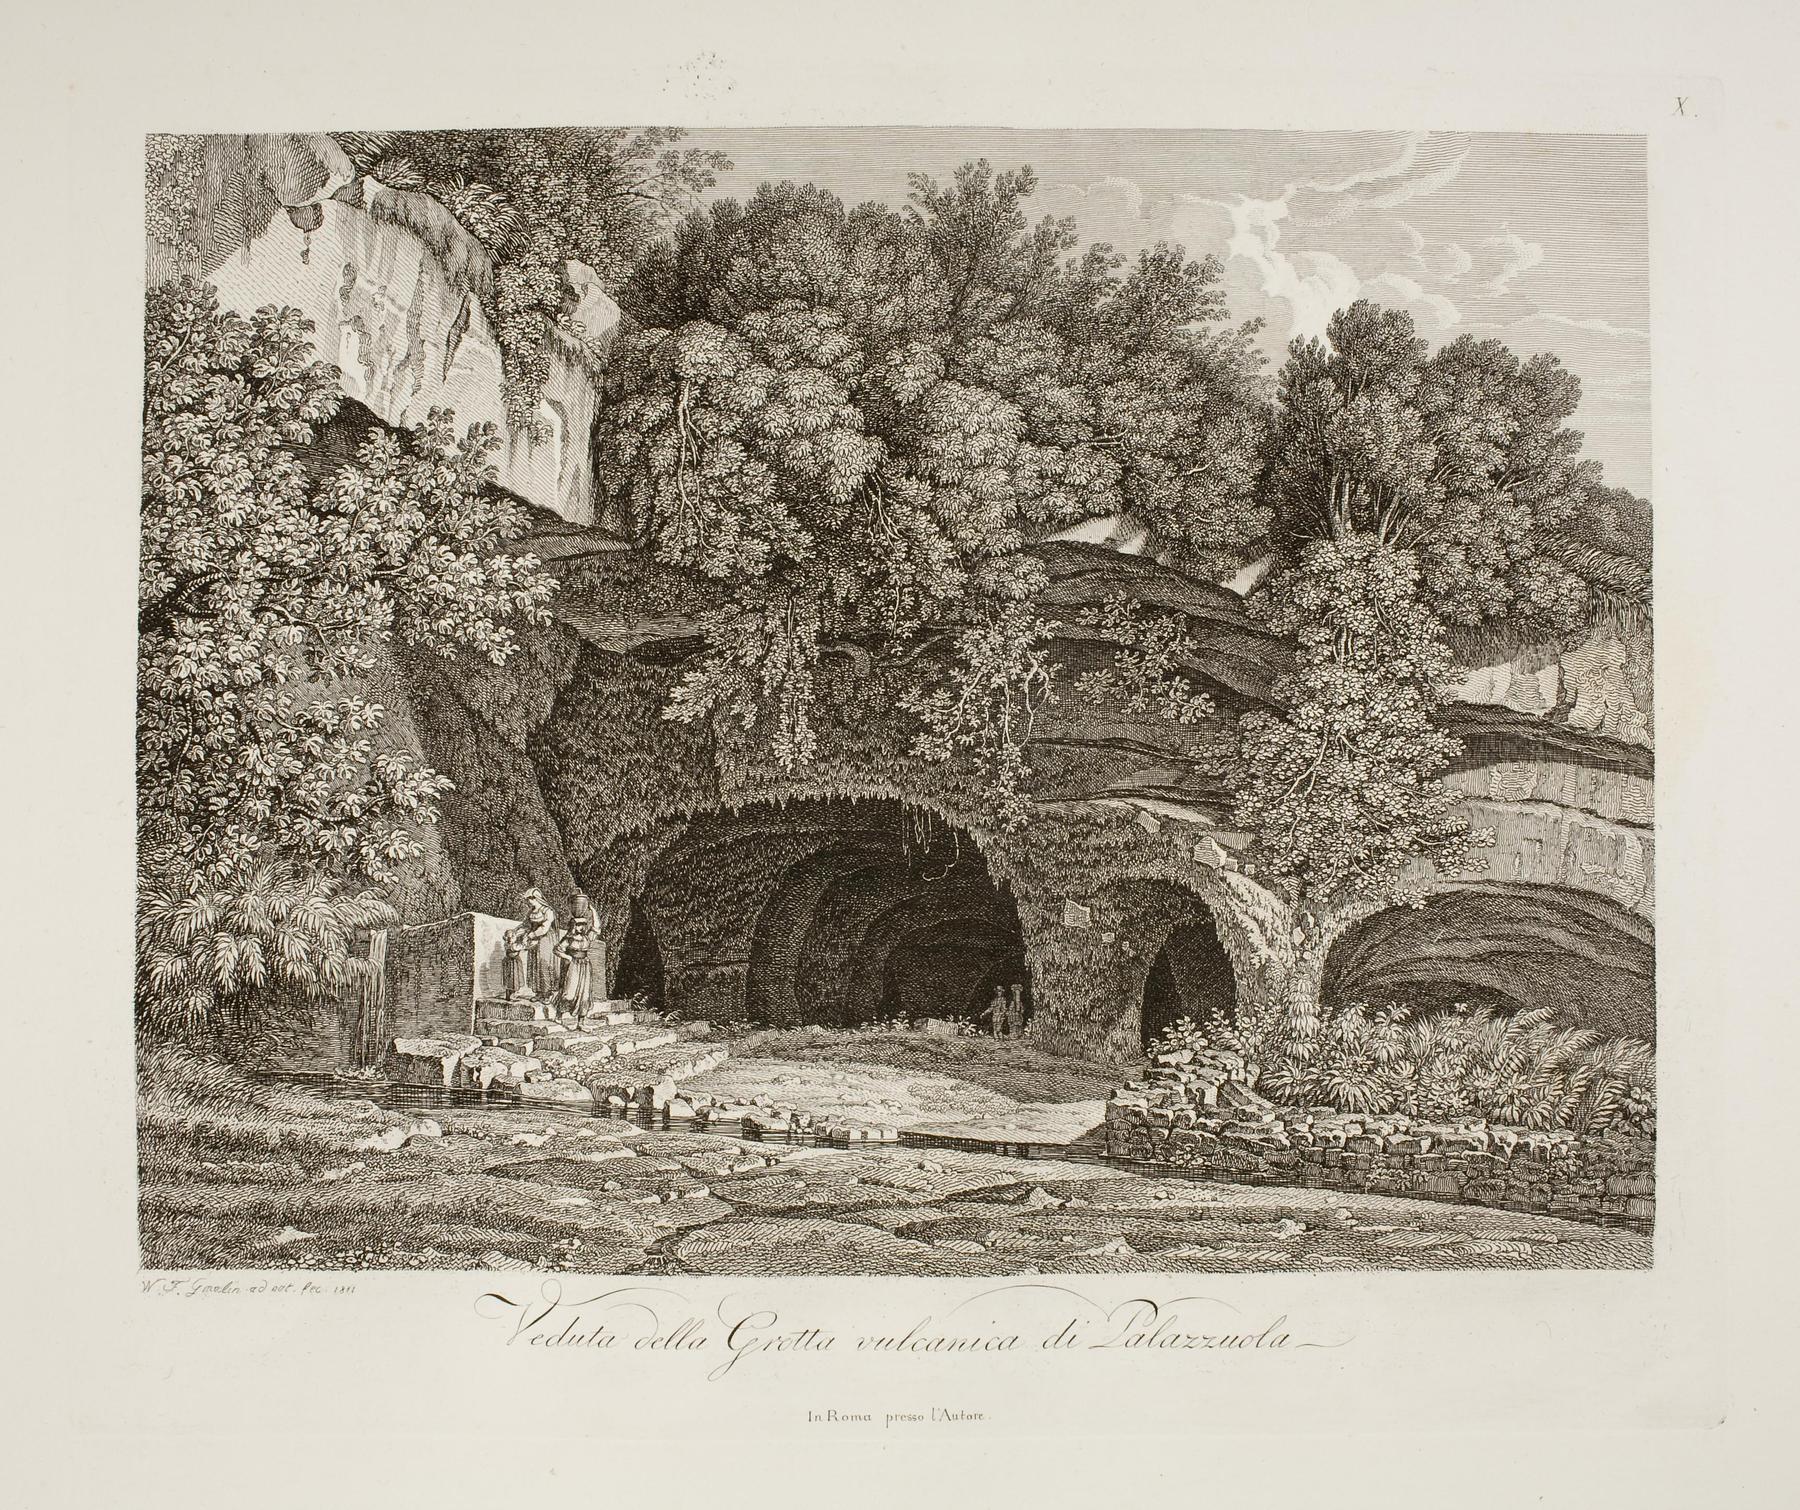 View of the Volcanic Cave in Palazzuola, E591,10